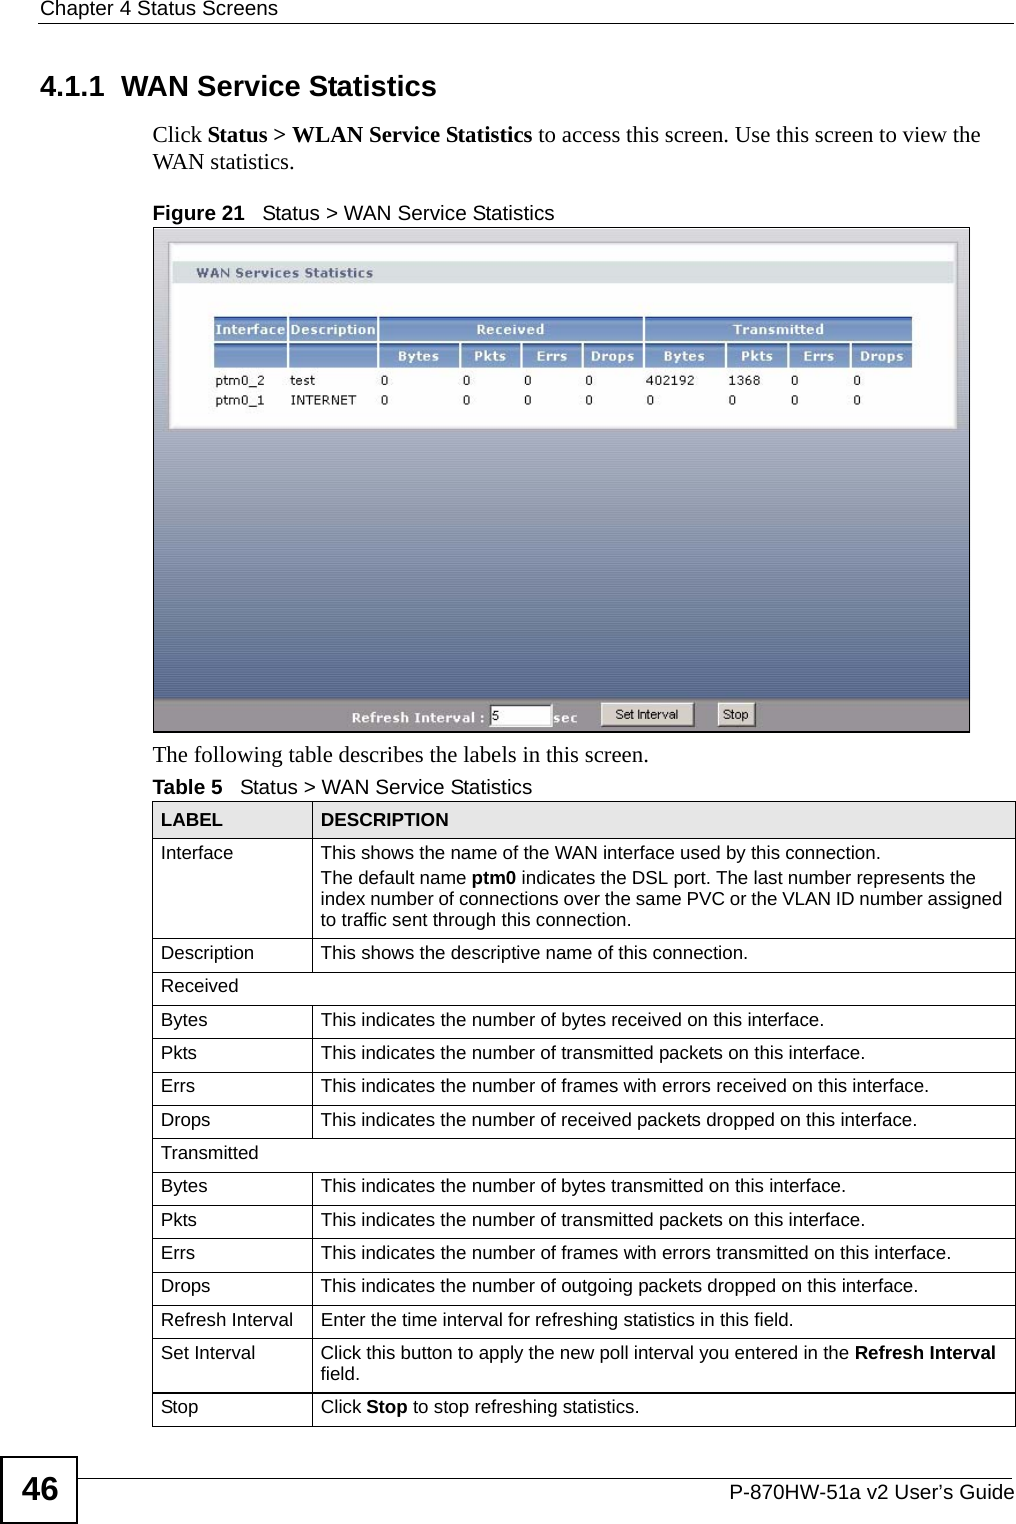 Chapter 4 Status ScreensP-870HW-51a v2 User’s Guide464.1.1  WAN Service StatisticsClick Status &gt; WLAN Service Statistics to access this screen. Use this screen to view the WAN statistics.Figure 21   Status &gt; WAN Service Statistics The following table describes the labels in this screen. Table 5   Status &gt; WAN Service StatisticsLABEL DESCRIPTIONInterface This shows the name of the WAN interface used by this connection.The default name ptm0 indicates the DSL port. The last number represents the index number of connections over the same PVC or the VLAN ID number assigned to traffic sent through this connection.Description This shows the descriptive name of this connection.ReceivedBytes This indicates the number of bytes received on this interface.Pkts This indicates the number of transmitted packets on this interface.Errs This indicates the number of frames with errors received on this interface.Drops This indicates the number of received packets dropped on this interface.TransmittedBytes This indicates the number of bytes transmitted on this interface.Pkts This indicates the number of transmitted packets on this interface.Errs This indicates the number of frames with errors transmitted on this interface.Drops This indicates the number of outgoing packets dropped on this interface.Refresh Interval Enter the time interval for refreshing statistics in this field.Set Interval Click this button to apply the new poll interval you entered in the Refresh Interval field.Stop Click Stop to stop refreshing statistics.